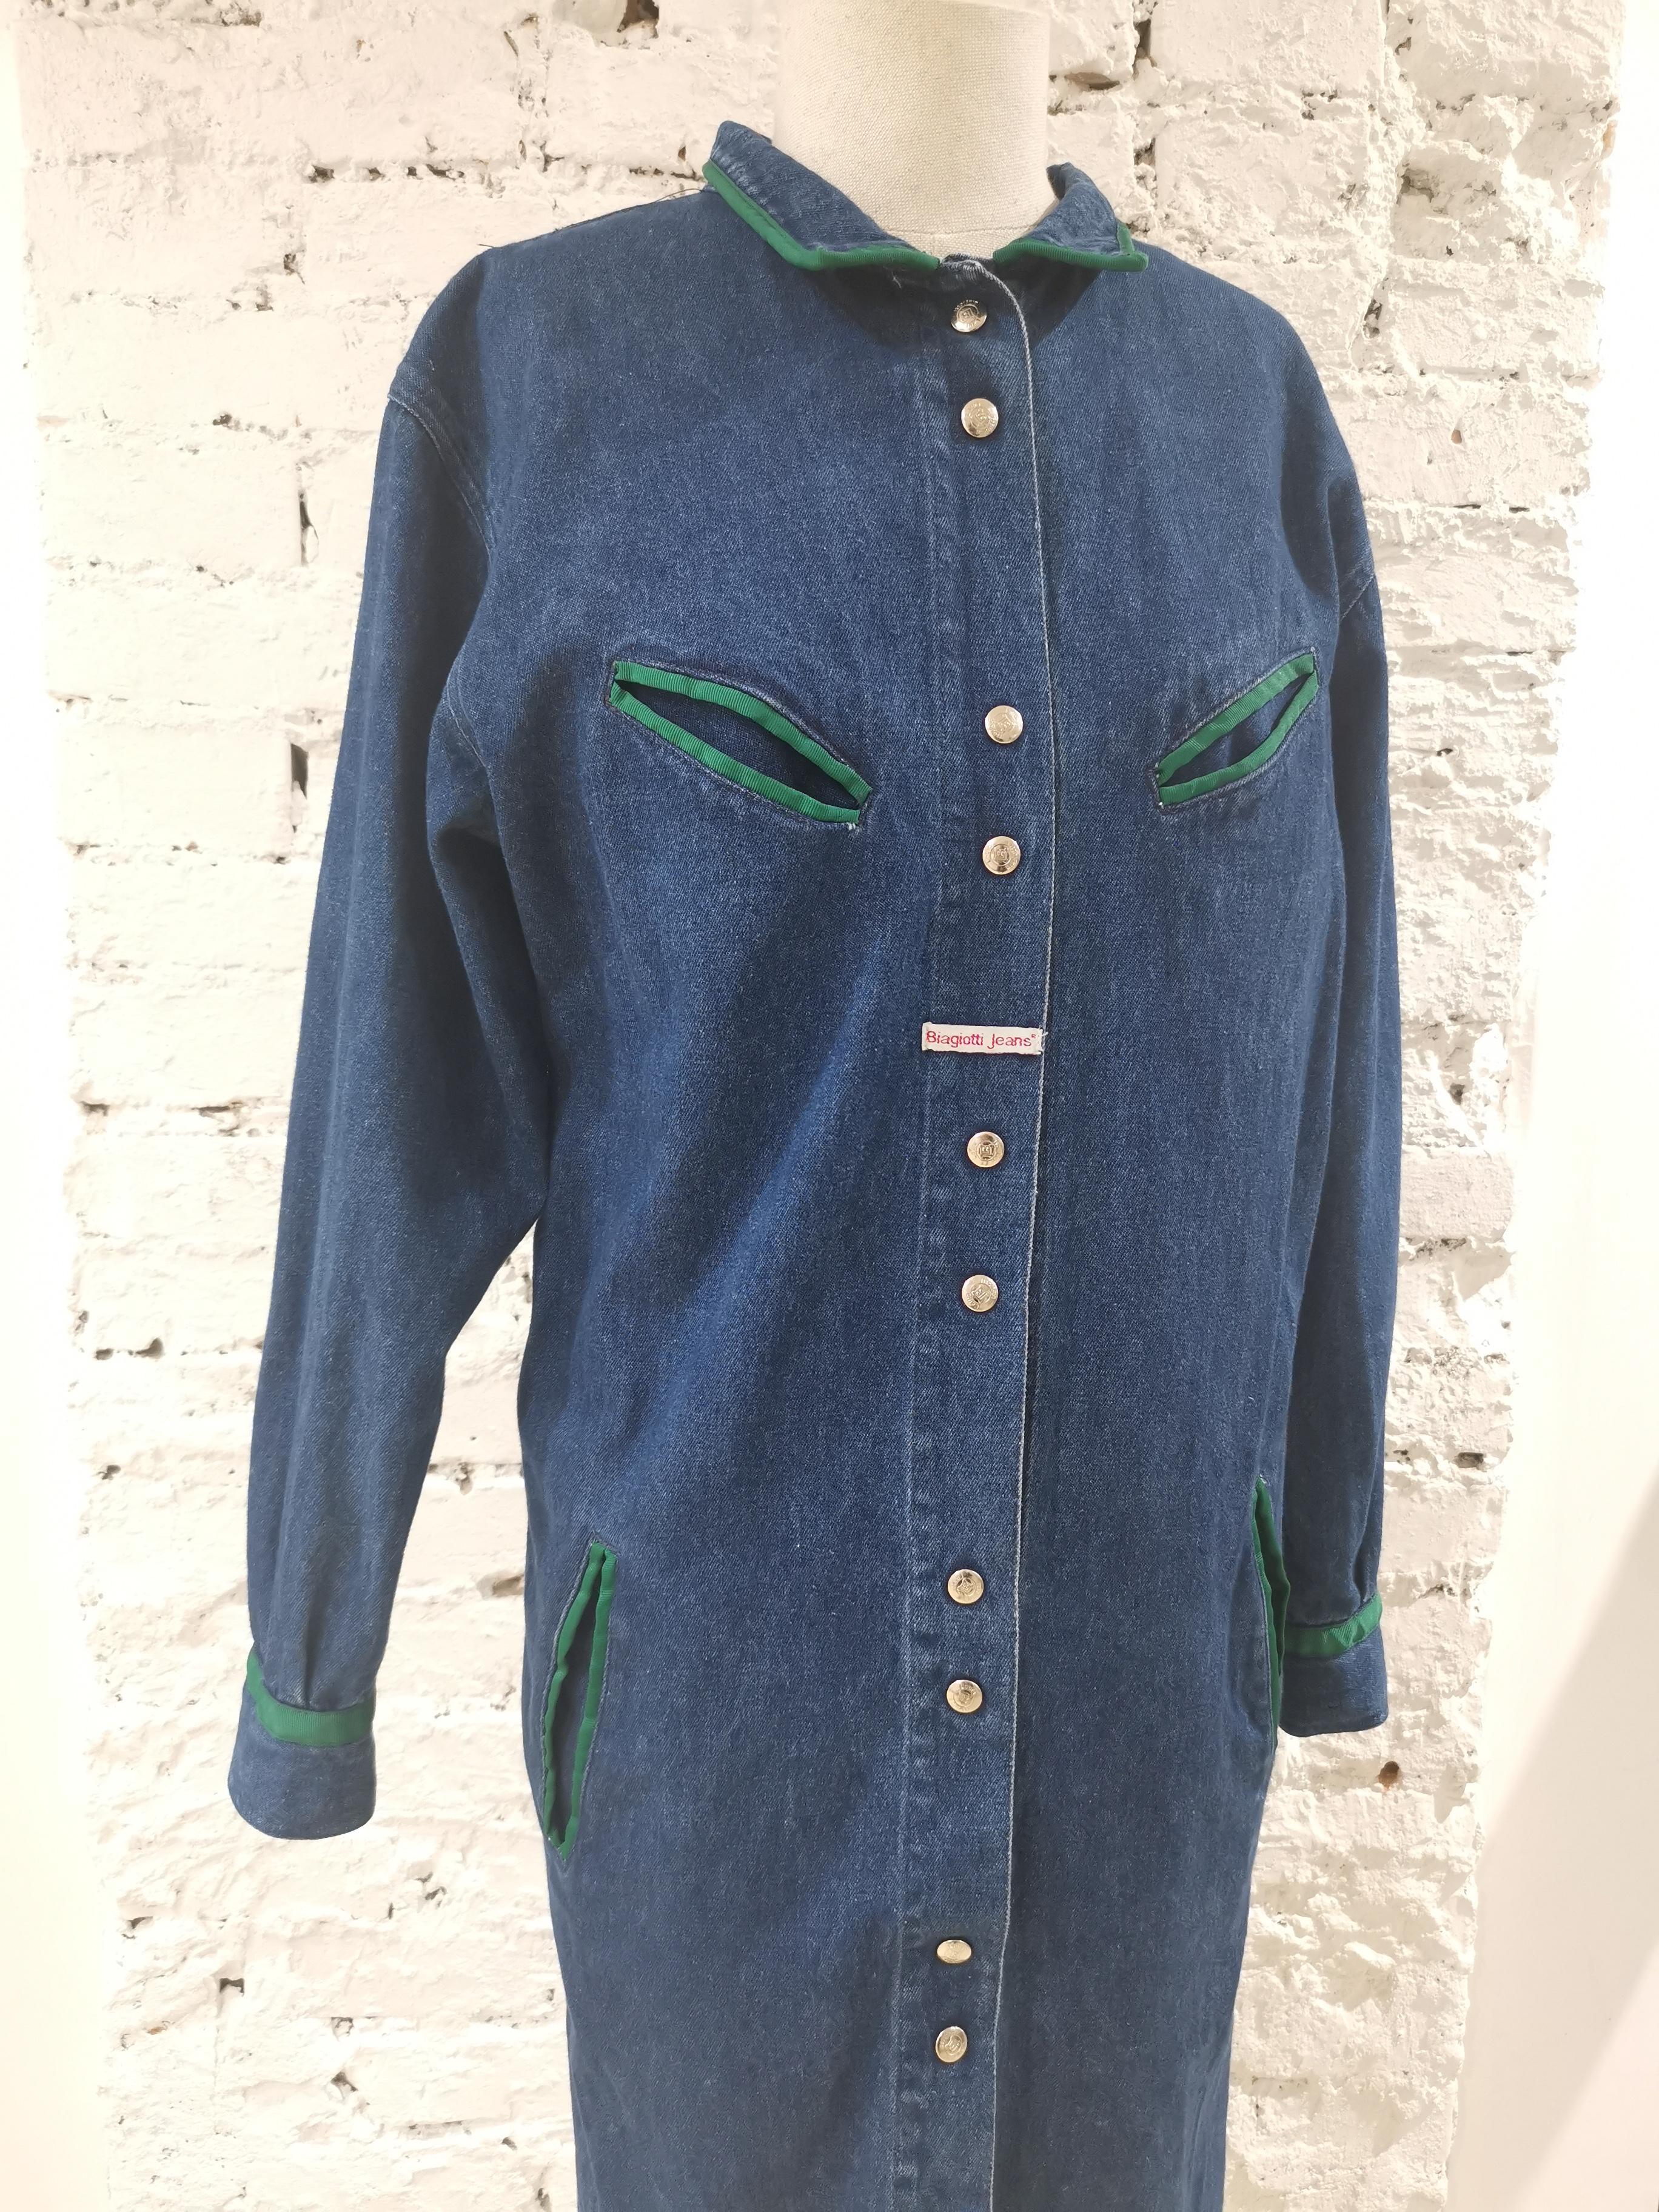 Laura Biagiotti denim long shirt - chemisier
totally made in italy in size M